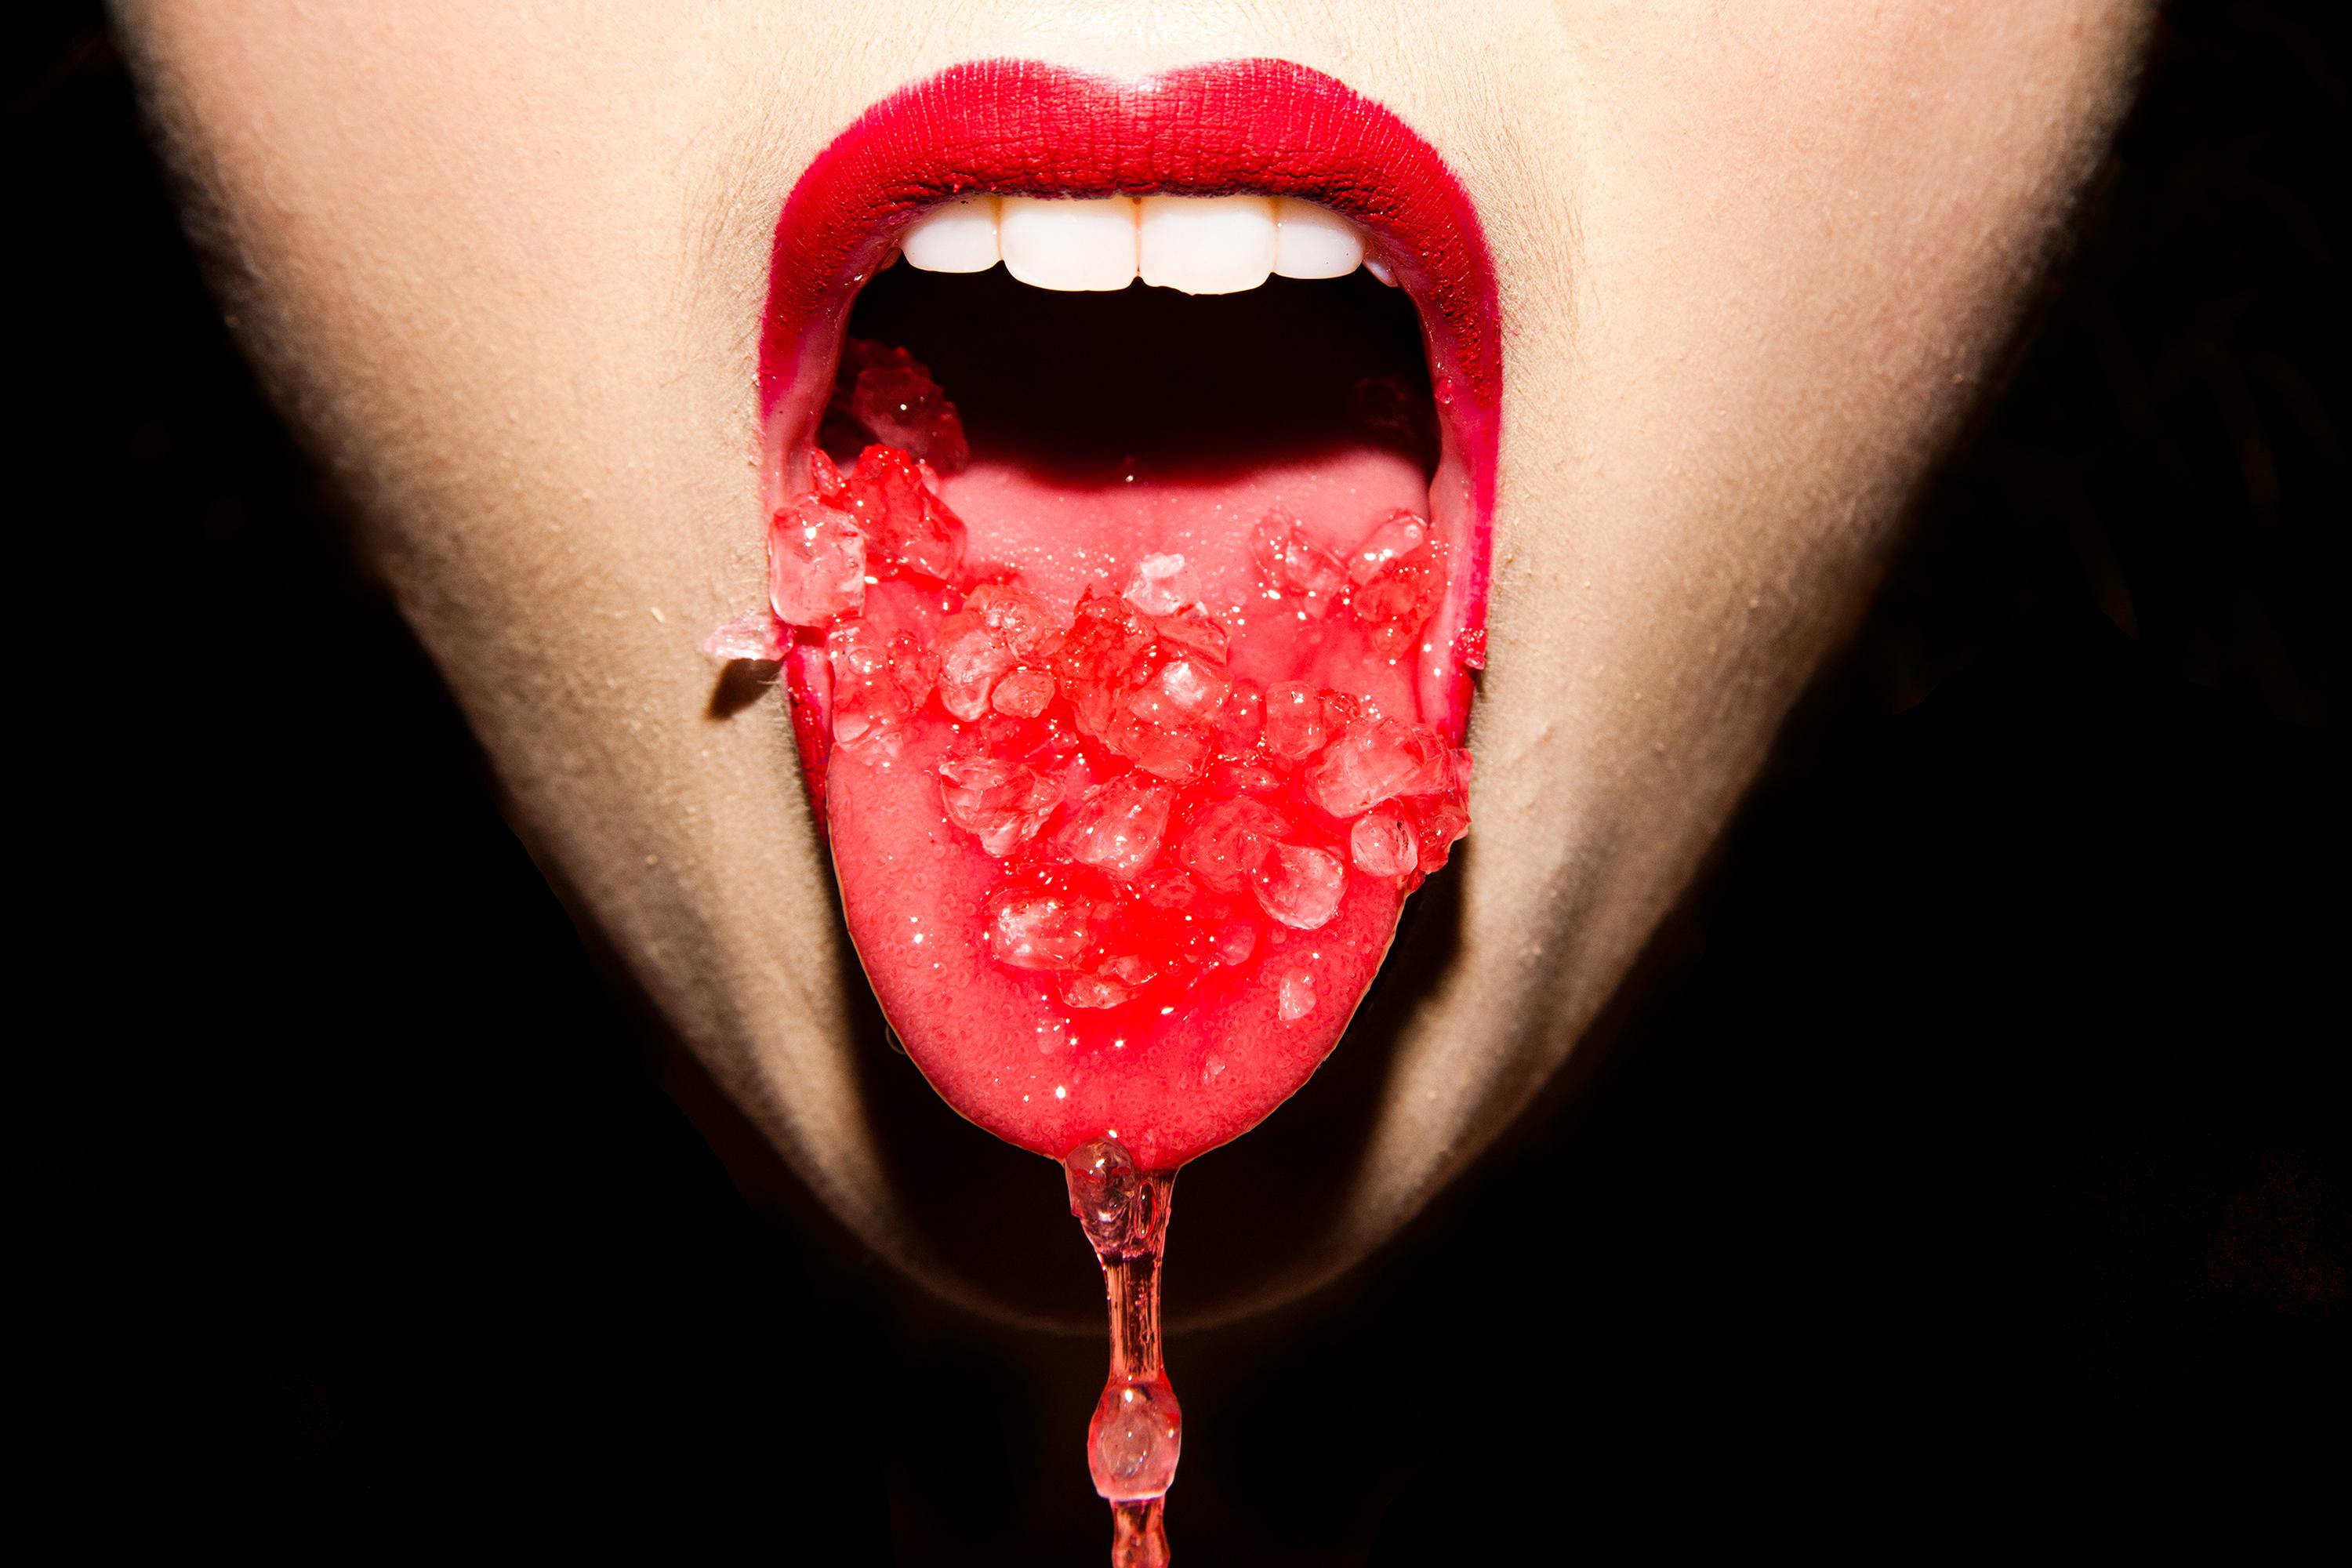 Tyler Shields Color Photograph - Mouth Drip (40" x 60")